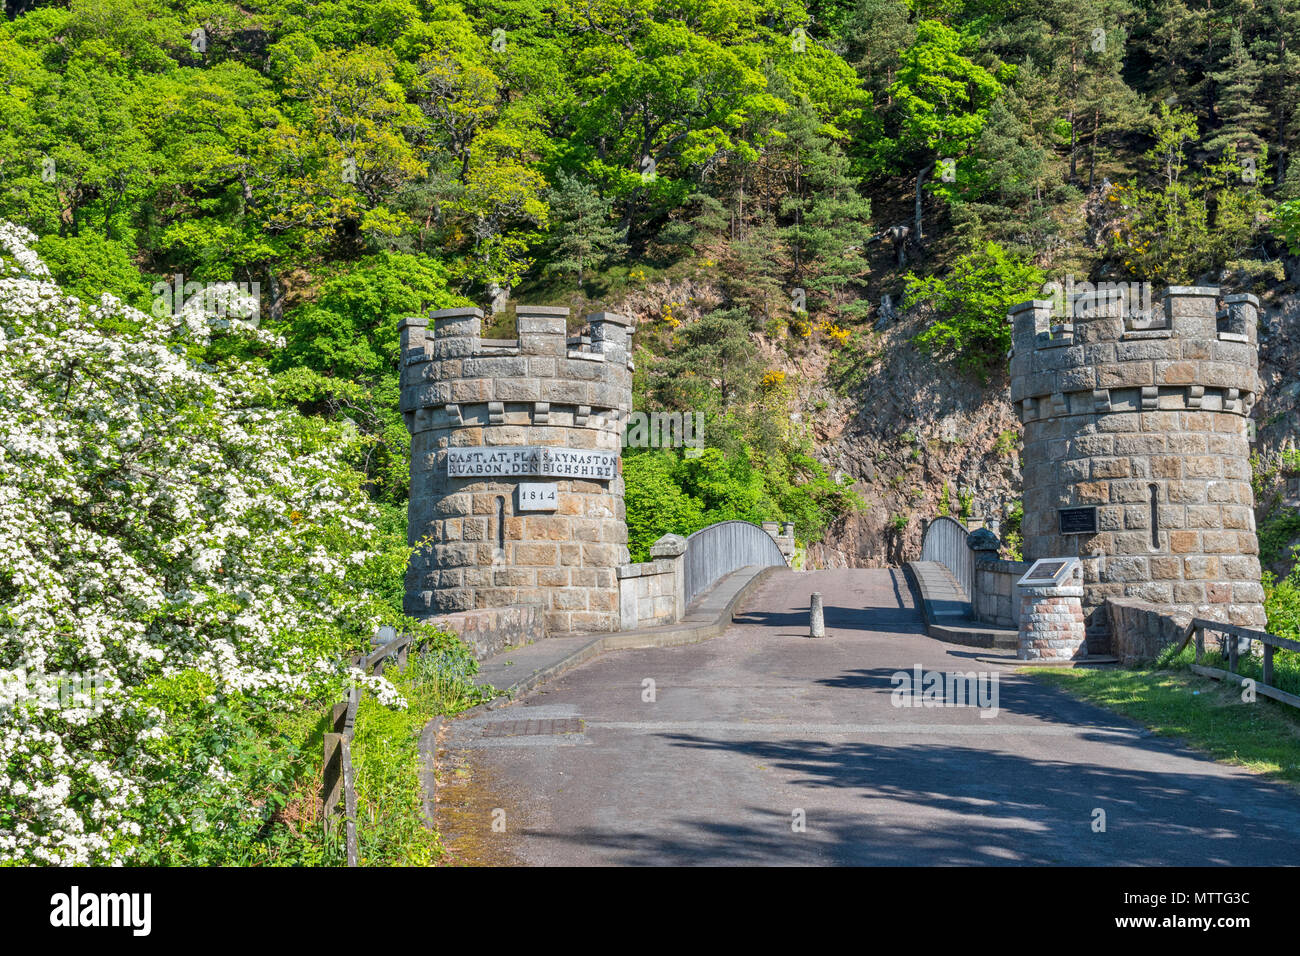 THOMAS TELFORD BRIDGE AT CRAIGELLACHIE SCOTLAND THE TOWERS AND SIGNPOSTS AND HAWTHORN BLOSSOM IN SPRING Stock Photo